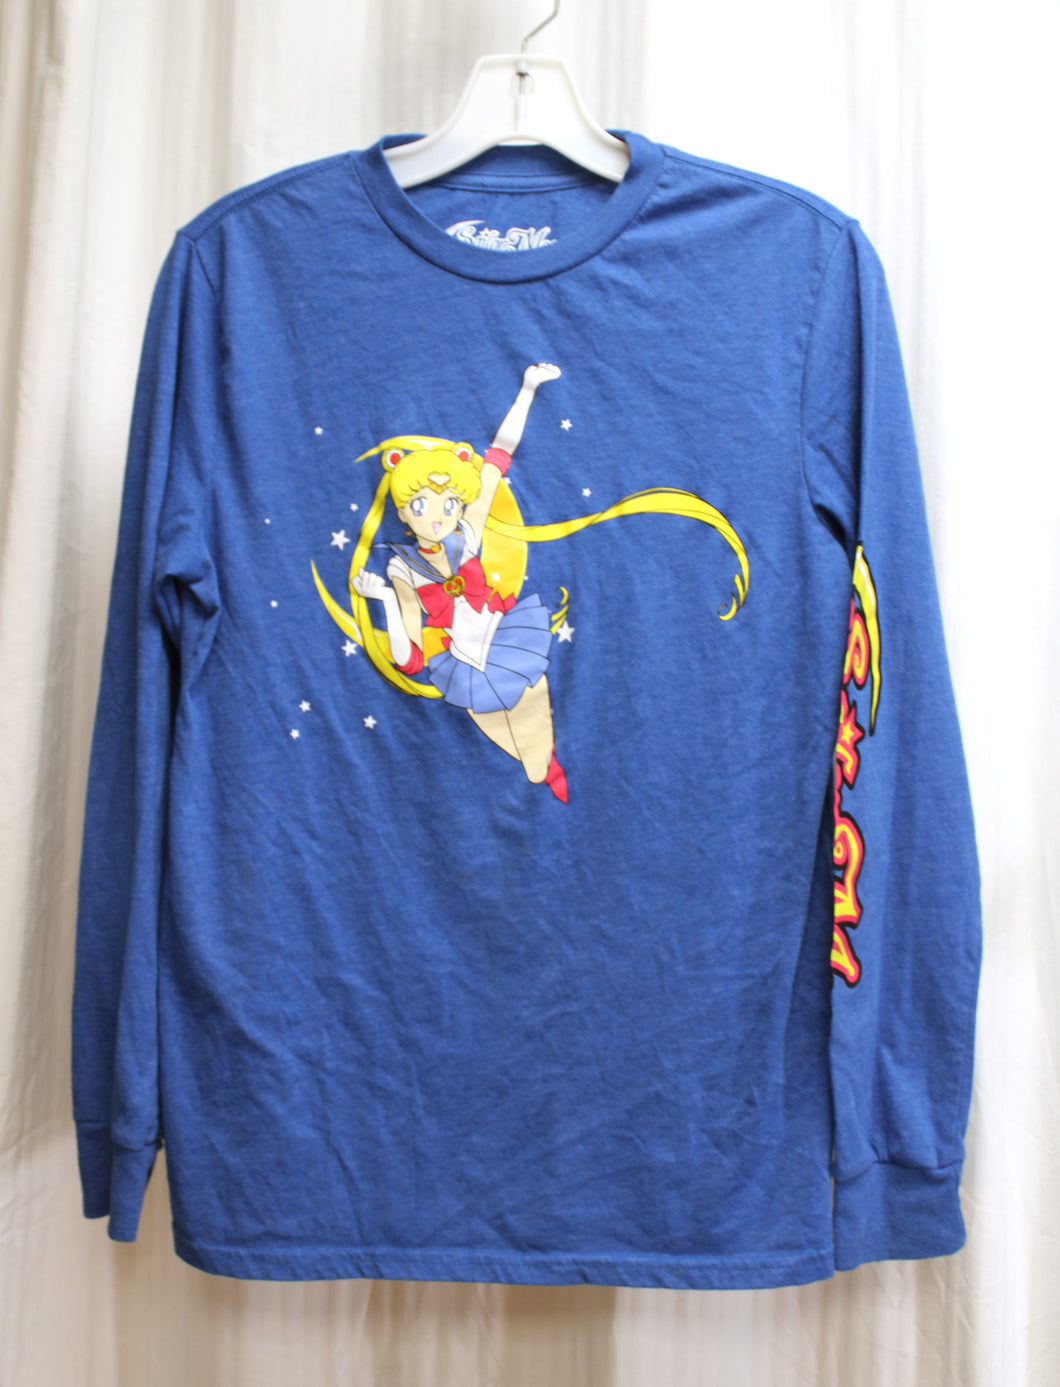 Sailor Moon - Long Sleeve Blue Heather T-Shirt w/ Front and Sleeve Graphic - Size S